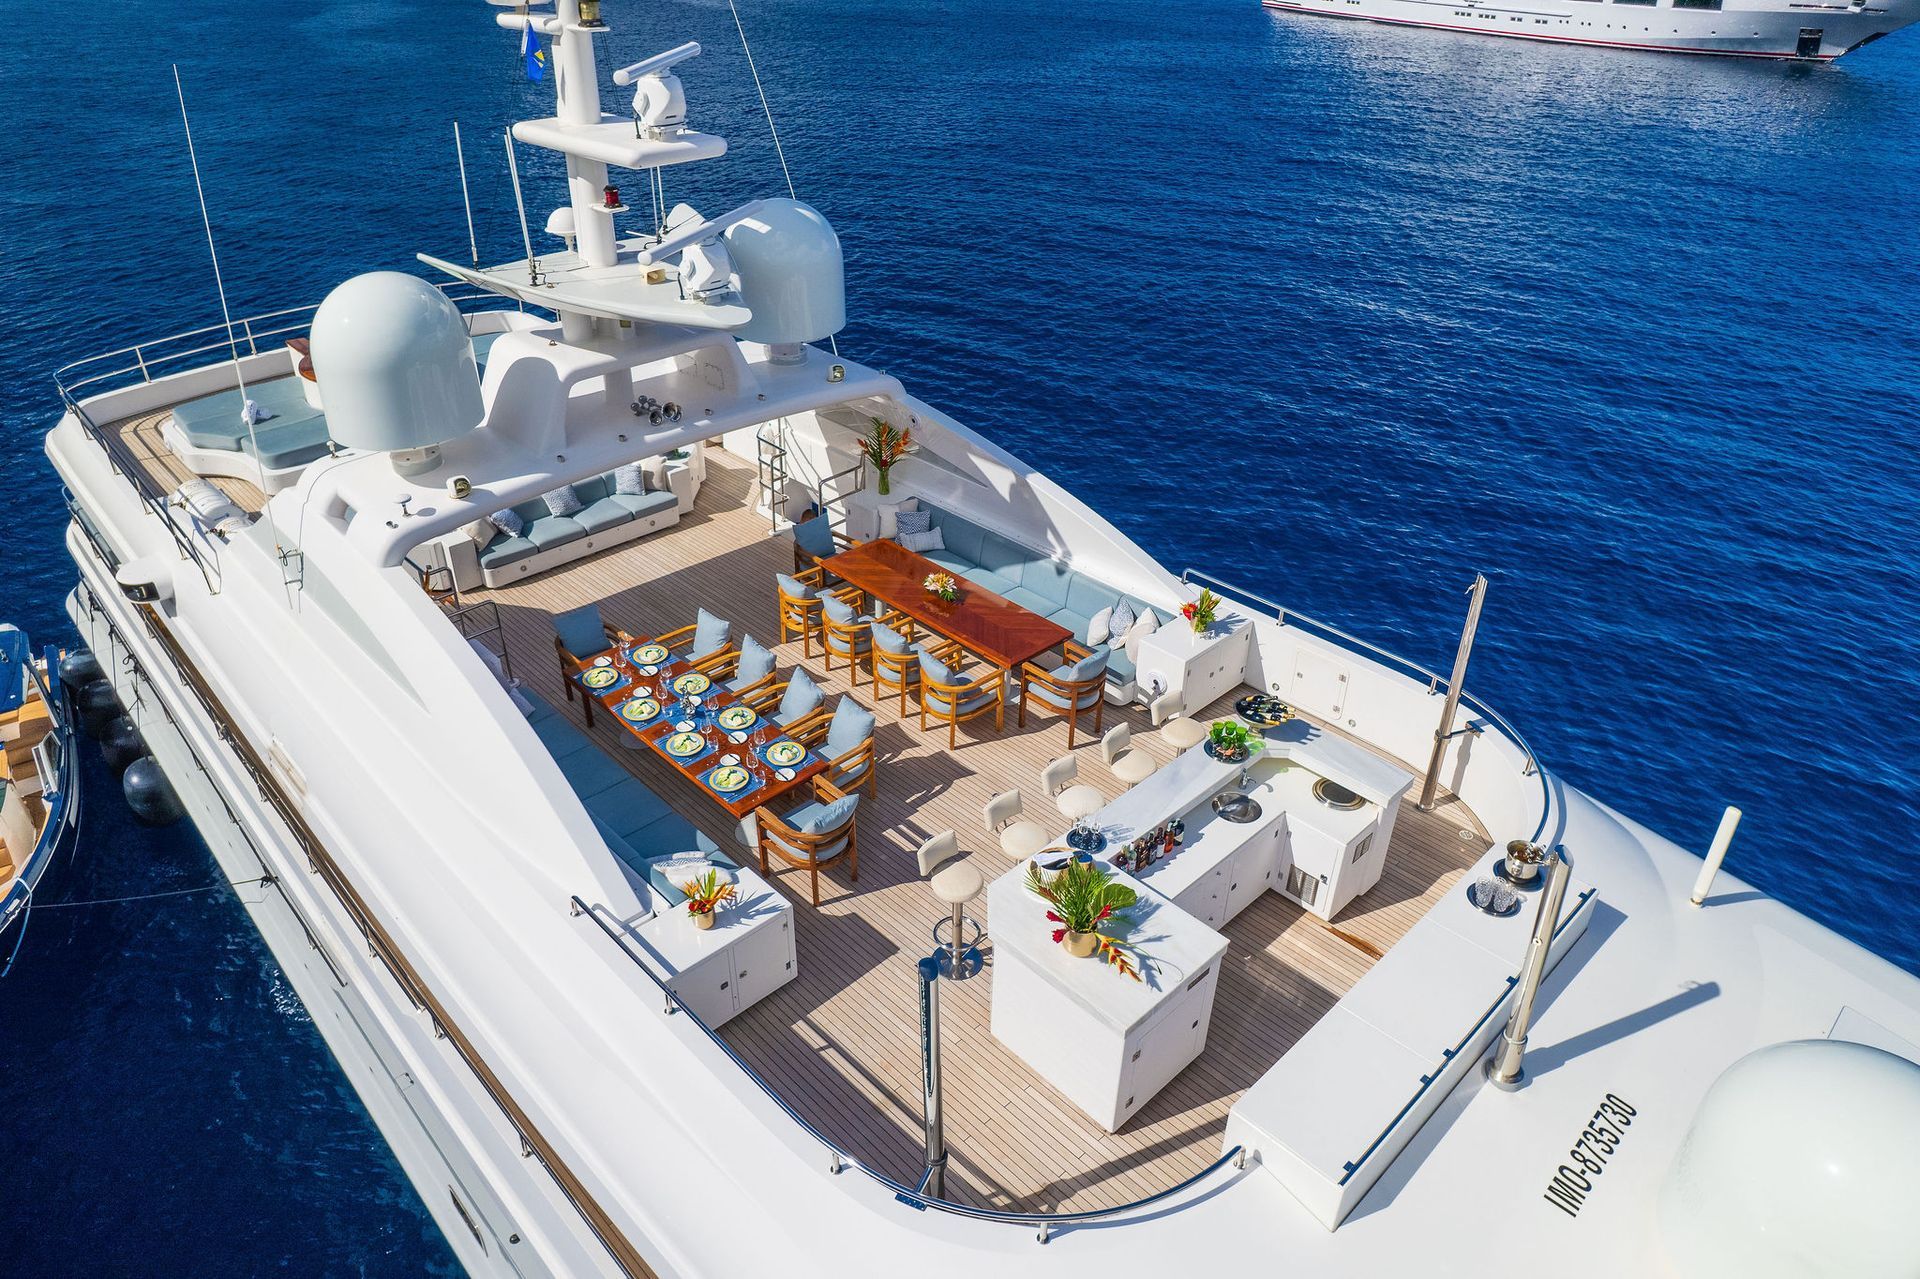 an aerial view of a large yacht in the ocean